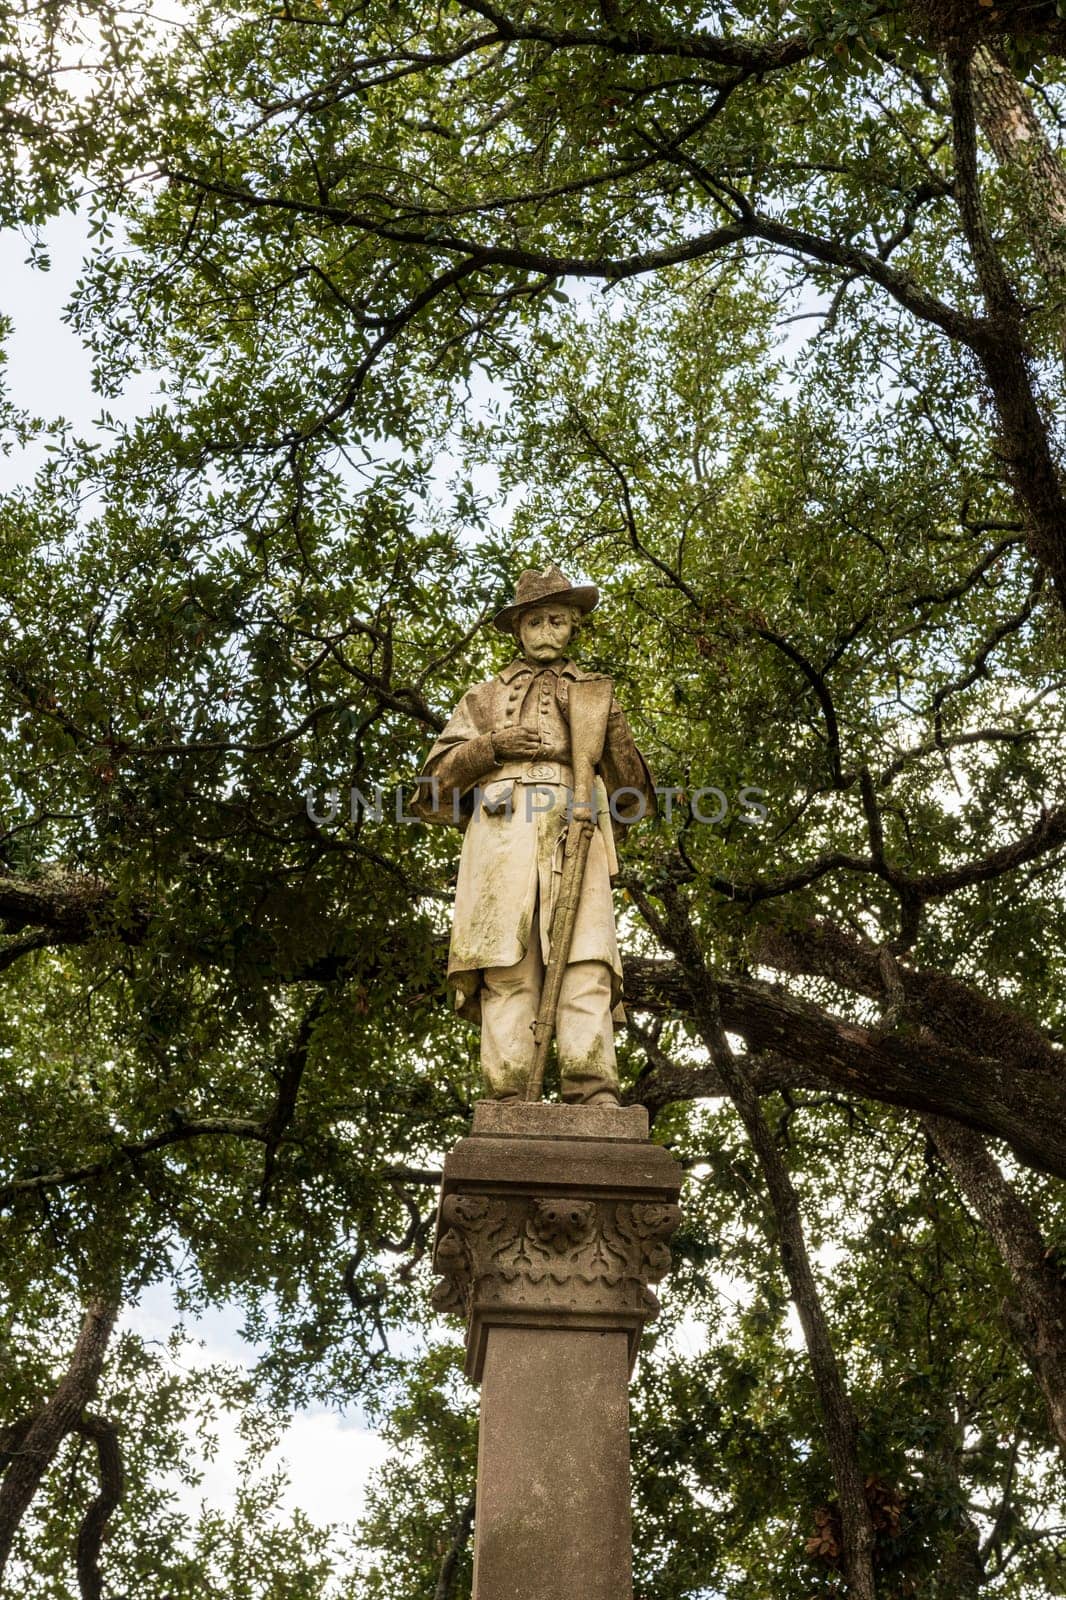 Front view of controversial statue and monument to surrendering conferederate soldier in a park in Natchez, Mississippi